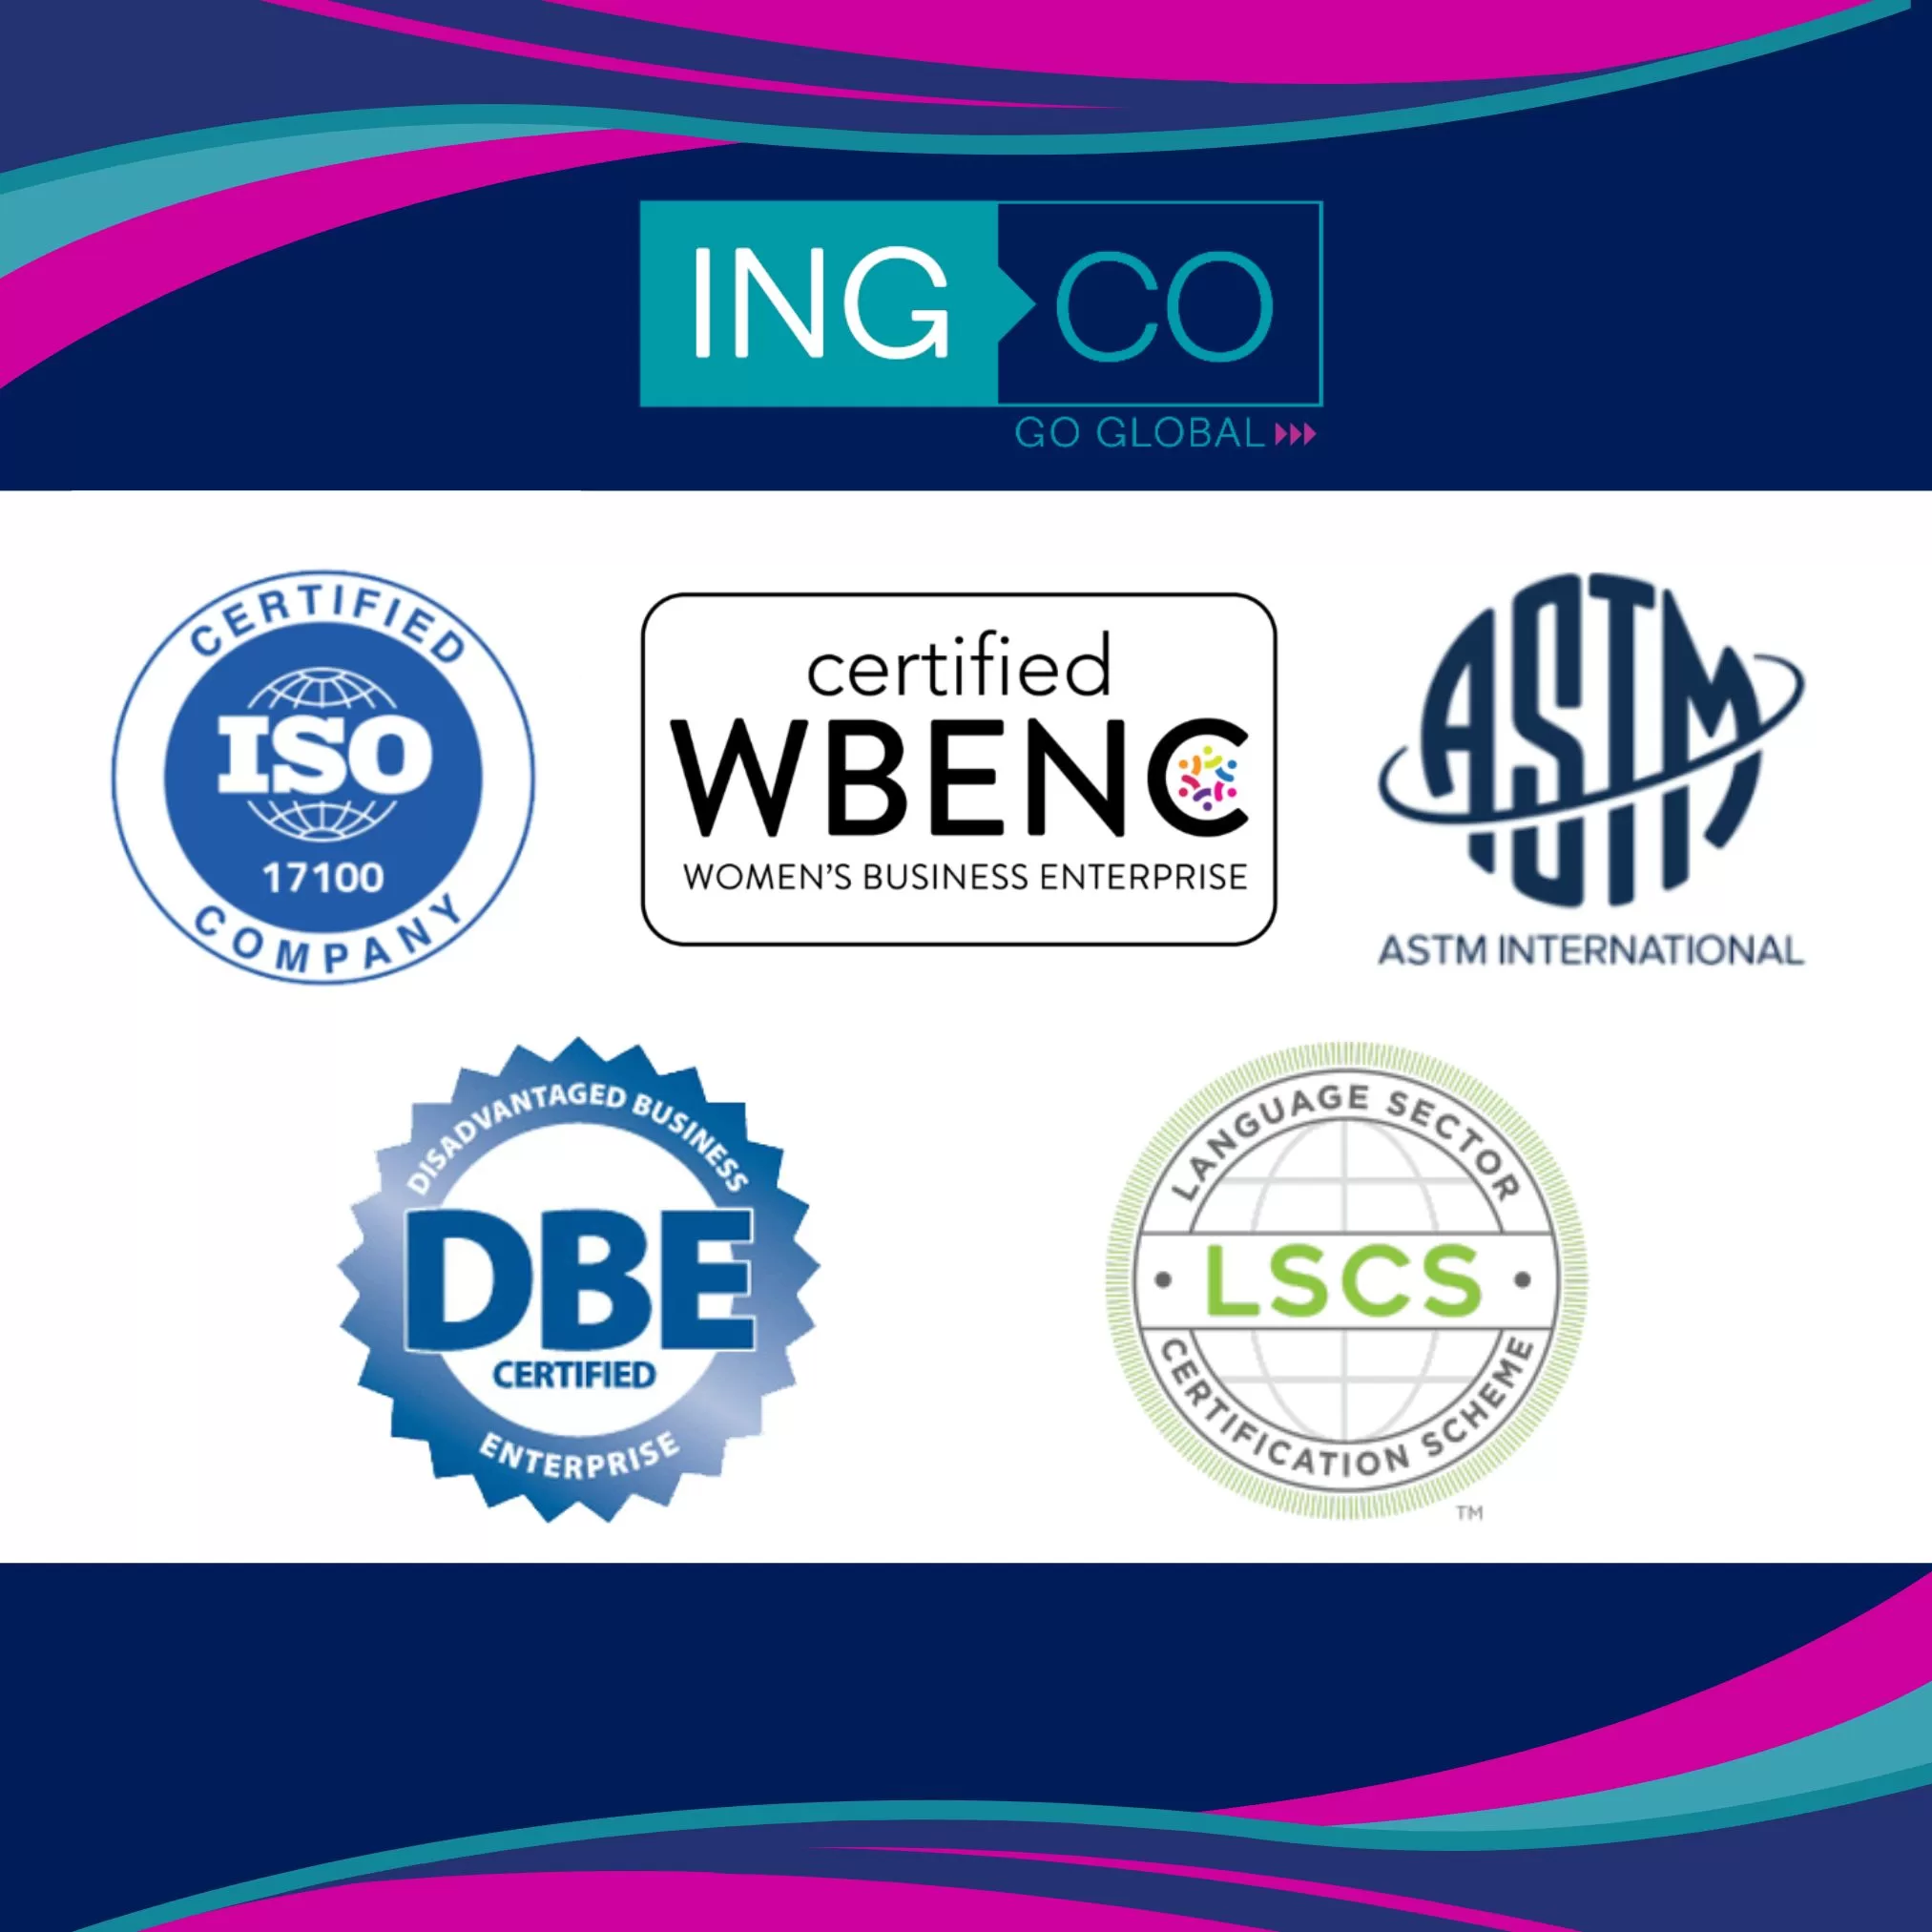 PRESS RELEASE: INGCO International, a Boutique LSP, is Exceeding Industry Certificate Standards and Making Big Moves in 2023